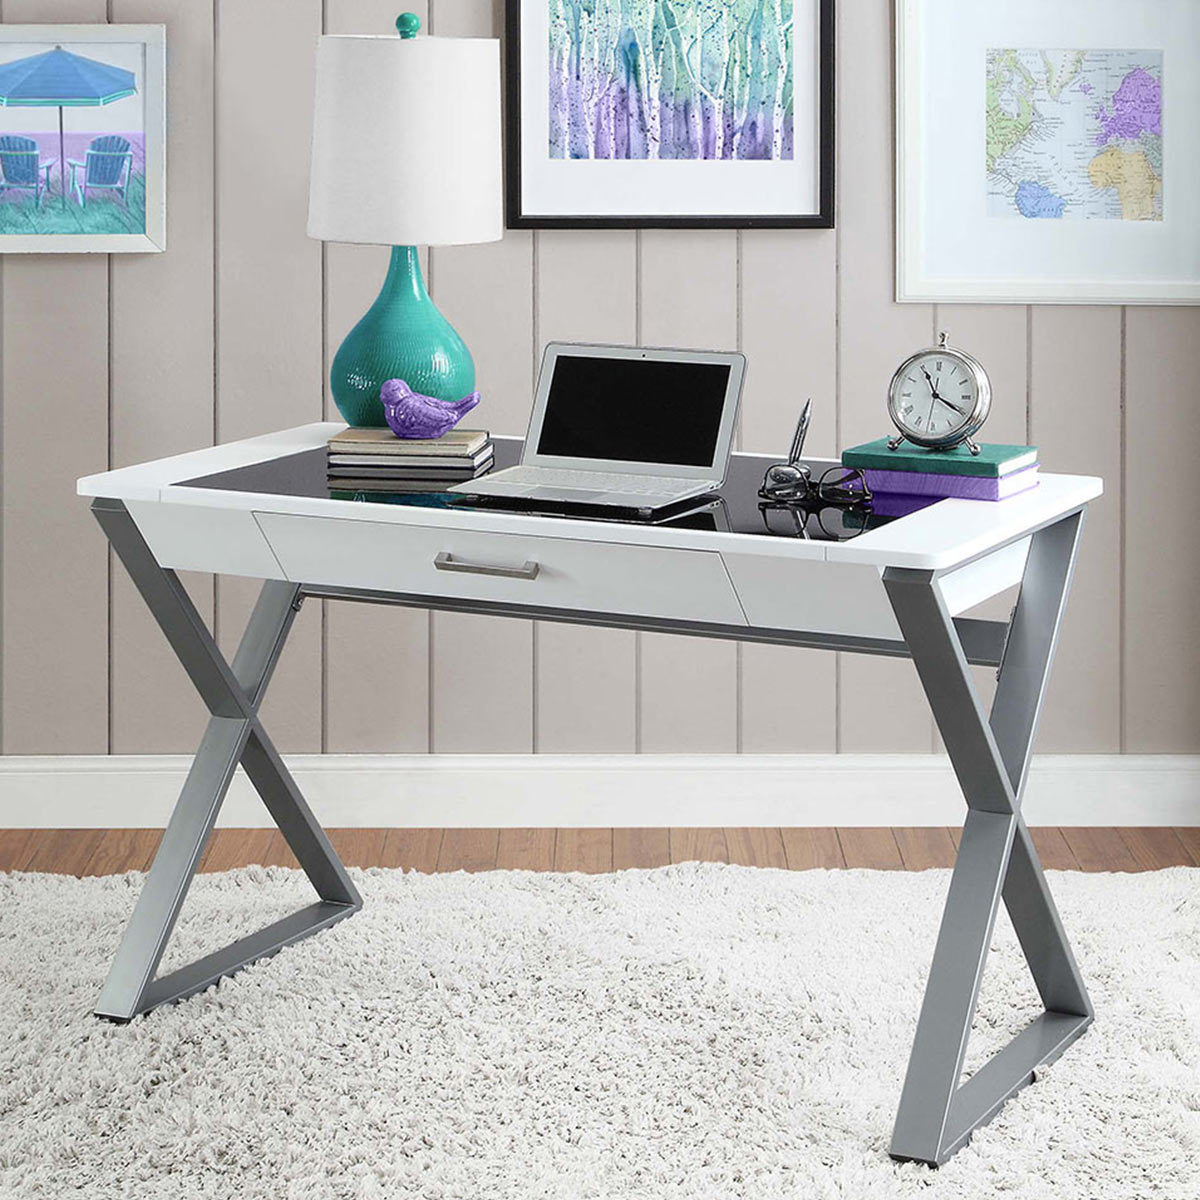 Bayside Furnishings Writing Desk With Tempered Glass Top Storage